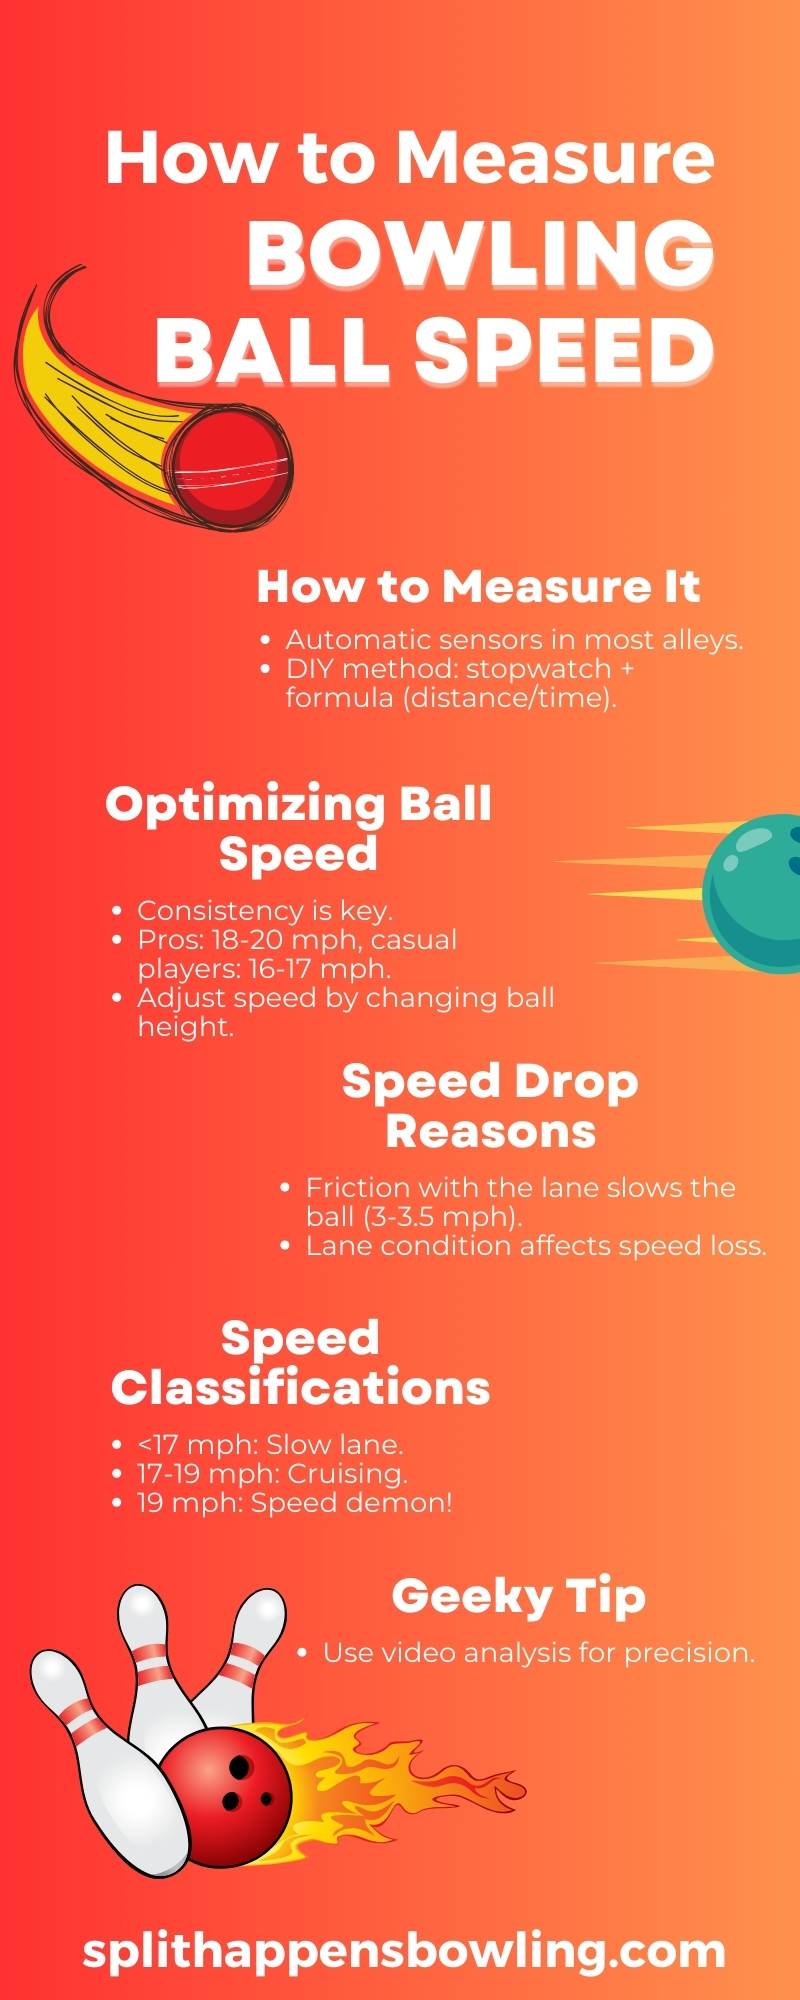 How to Measure Your Bowling Ball Speed Infographic